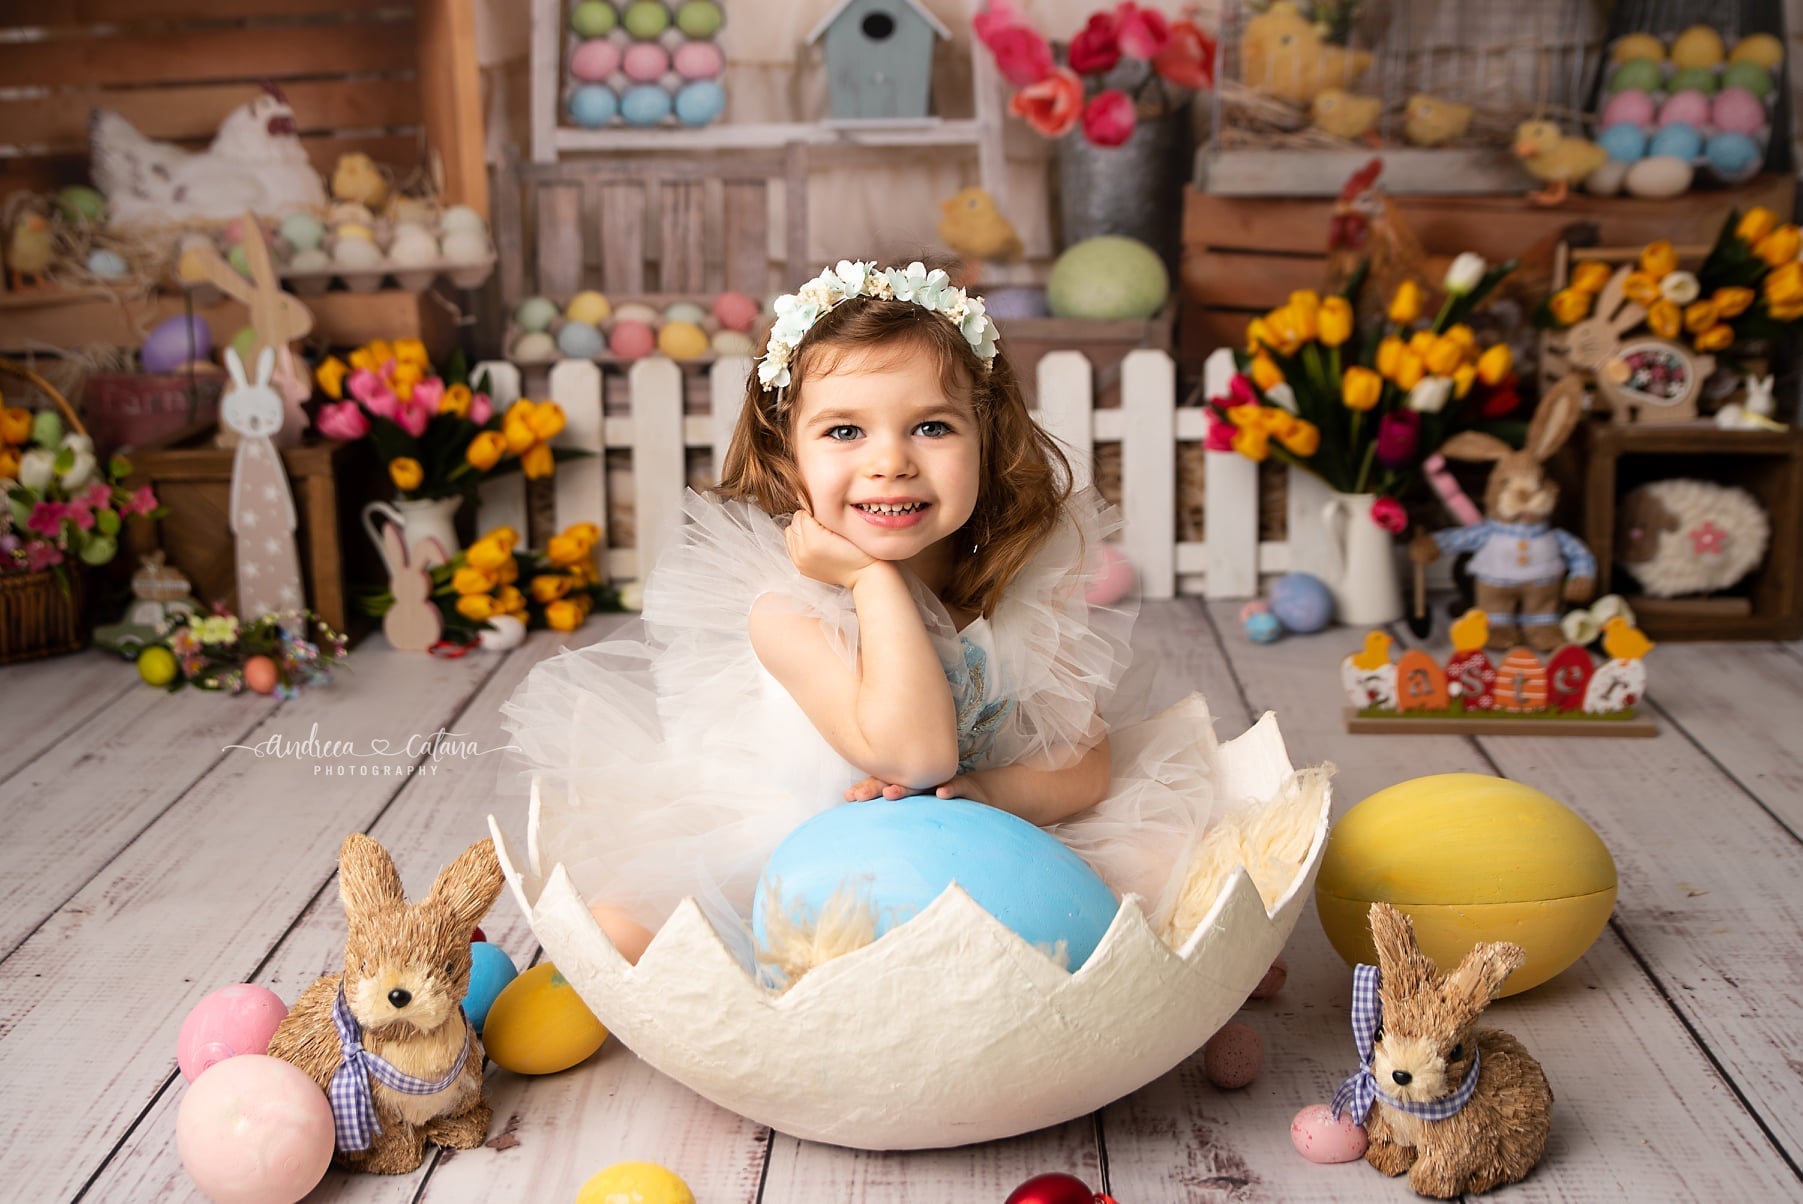 Kate 7x5ft Colorful Eggs Happy Easter Backdrop (only ship to Canada)